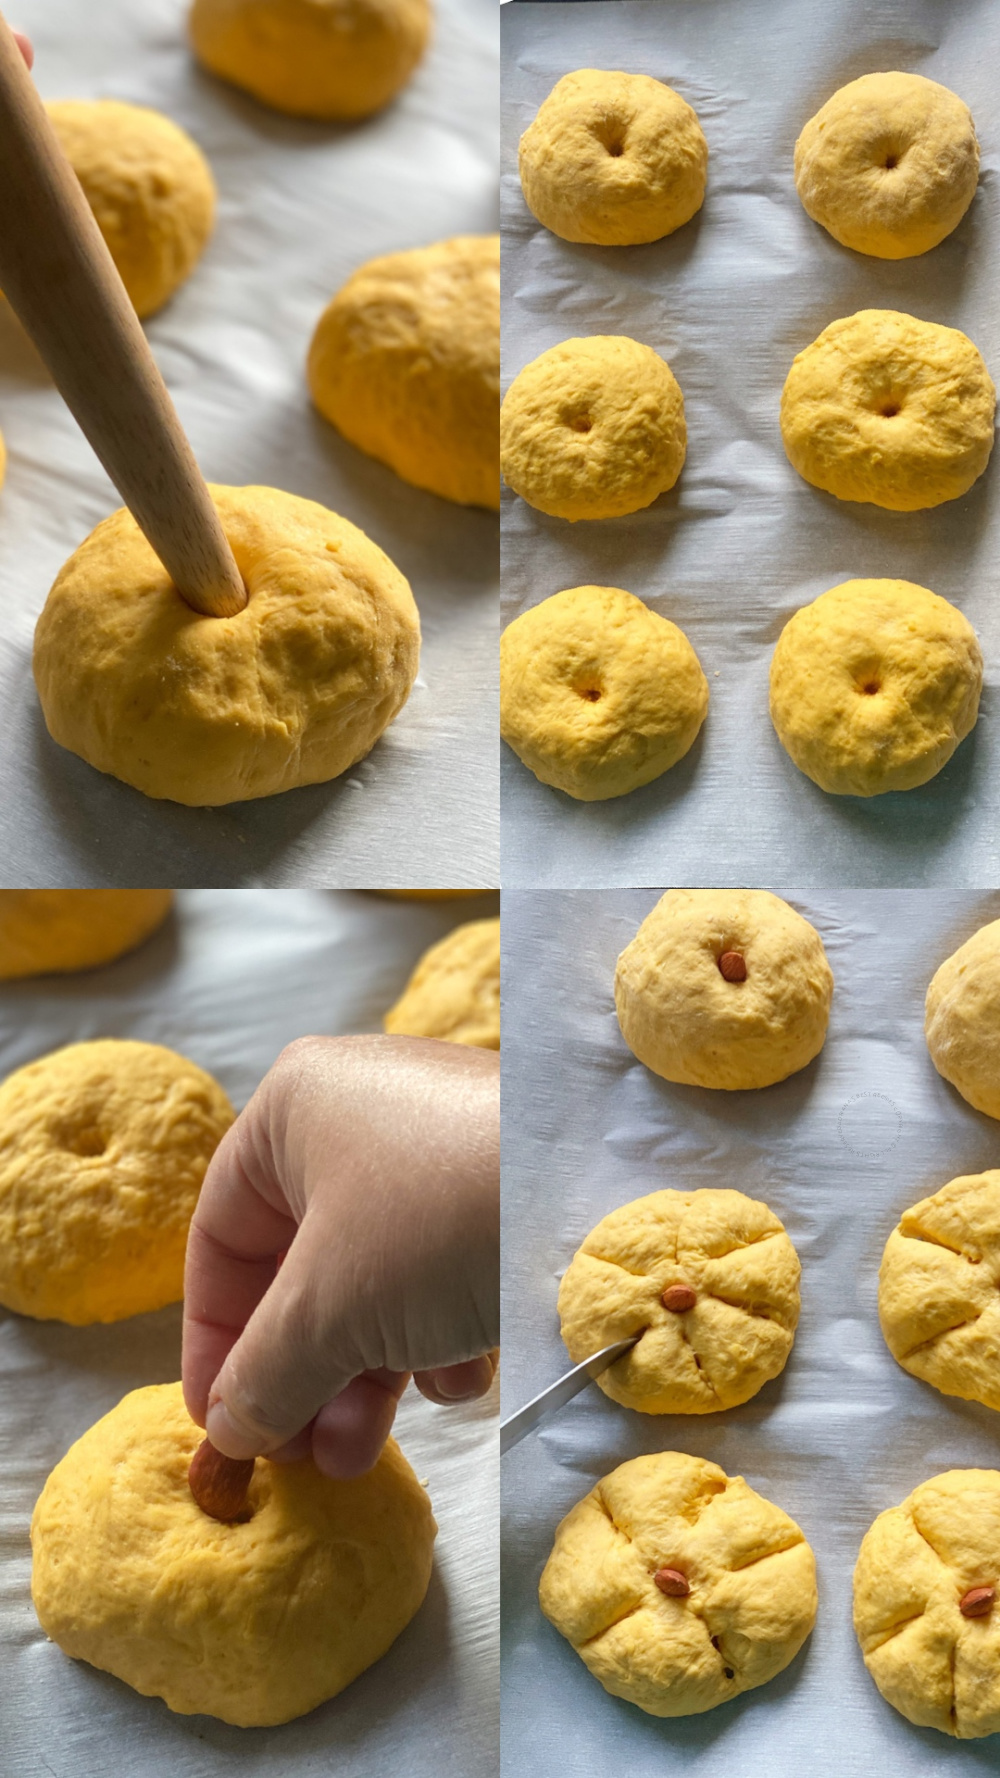 Step by Step on how to form the pumpkin shaped rolls